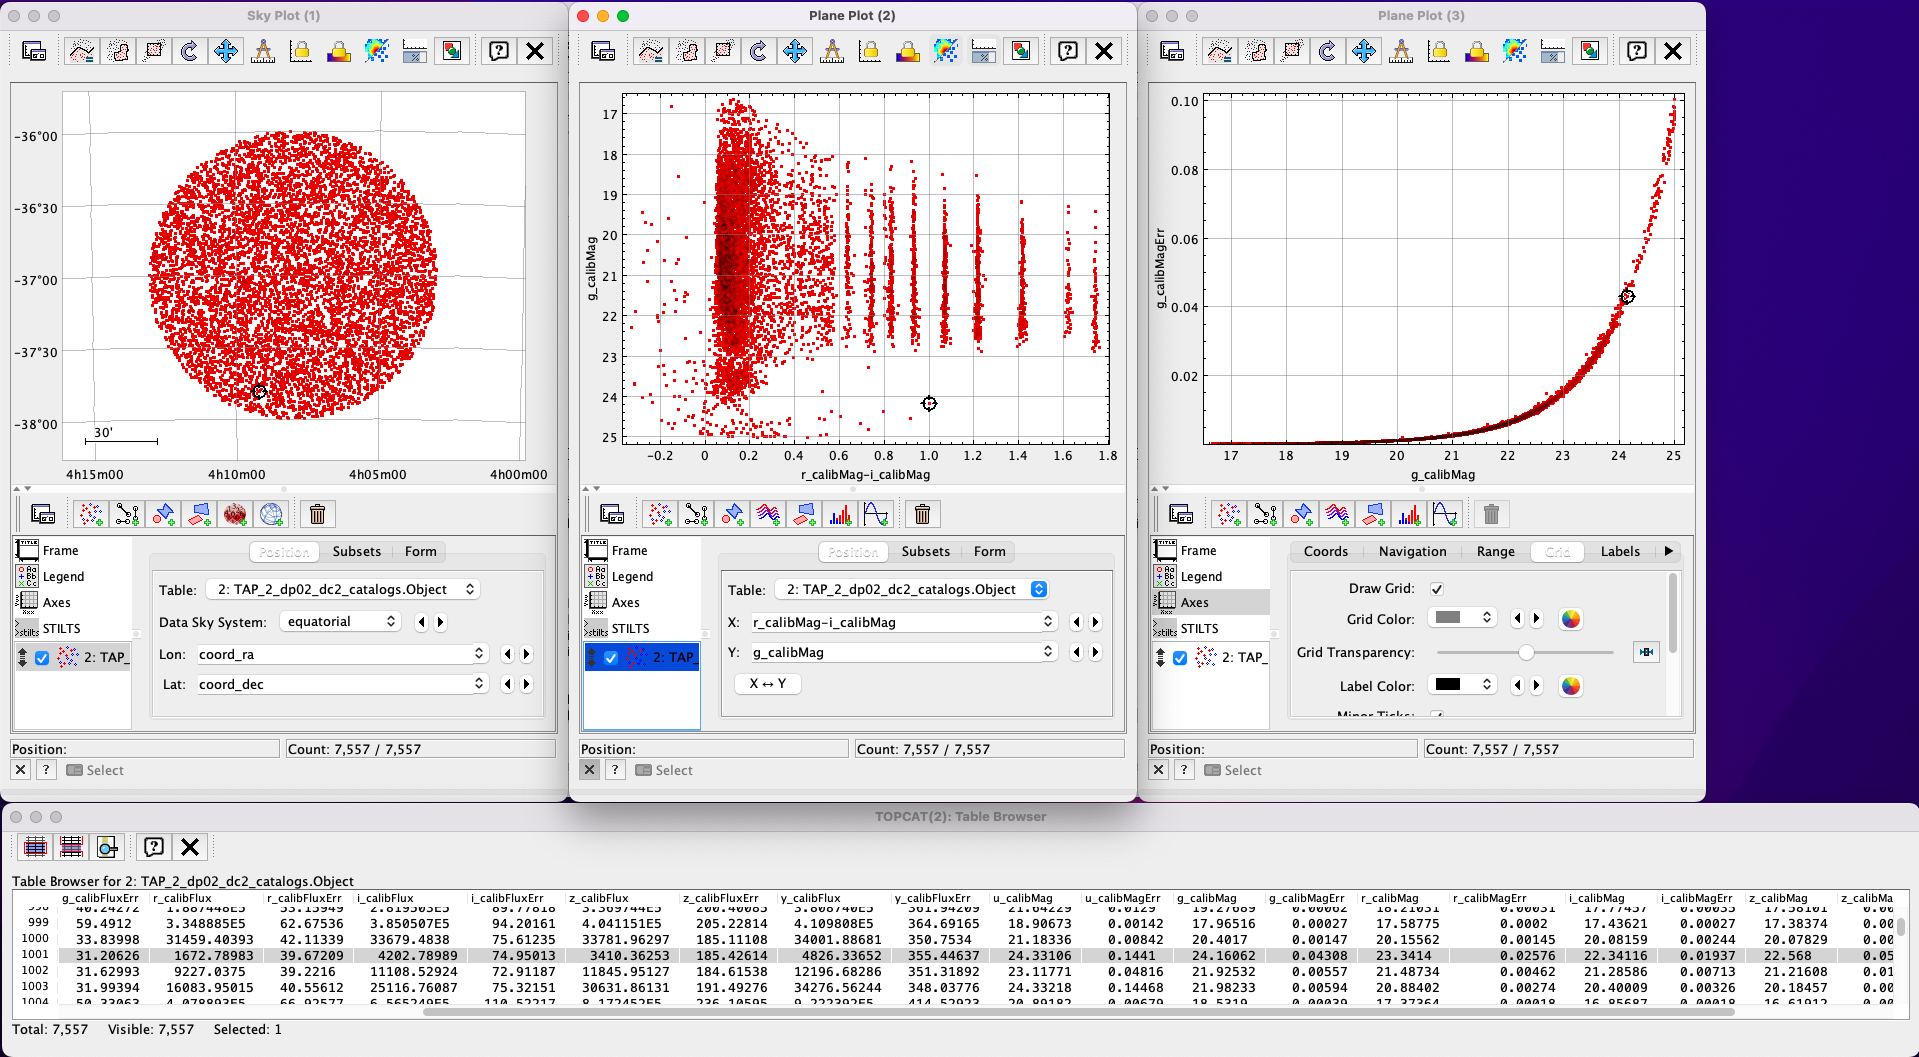 A screen shot showing a Sky Plot window and two Plane Plot windows -- one of the color-magnitude diagram and another of the g-band magnitude error versus magnitude plot.  Also shown is a Table Browser window.  All of these are for the data in Table 2.  In the color-magnitude plot, a symbol is marked by a black circle with cross-hairs. There is also a symbol marked by a black circle with cross-hairs in the other two plots.  These are all for the same object from Table 2.  Note also that there is a row highlighted in the Table Browser. This is the row for that same object marked by the black circle with cross-hairs in the 3 plots.